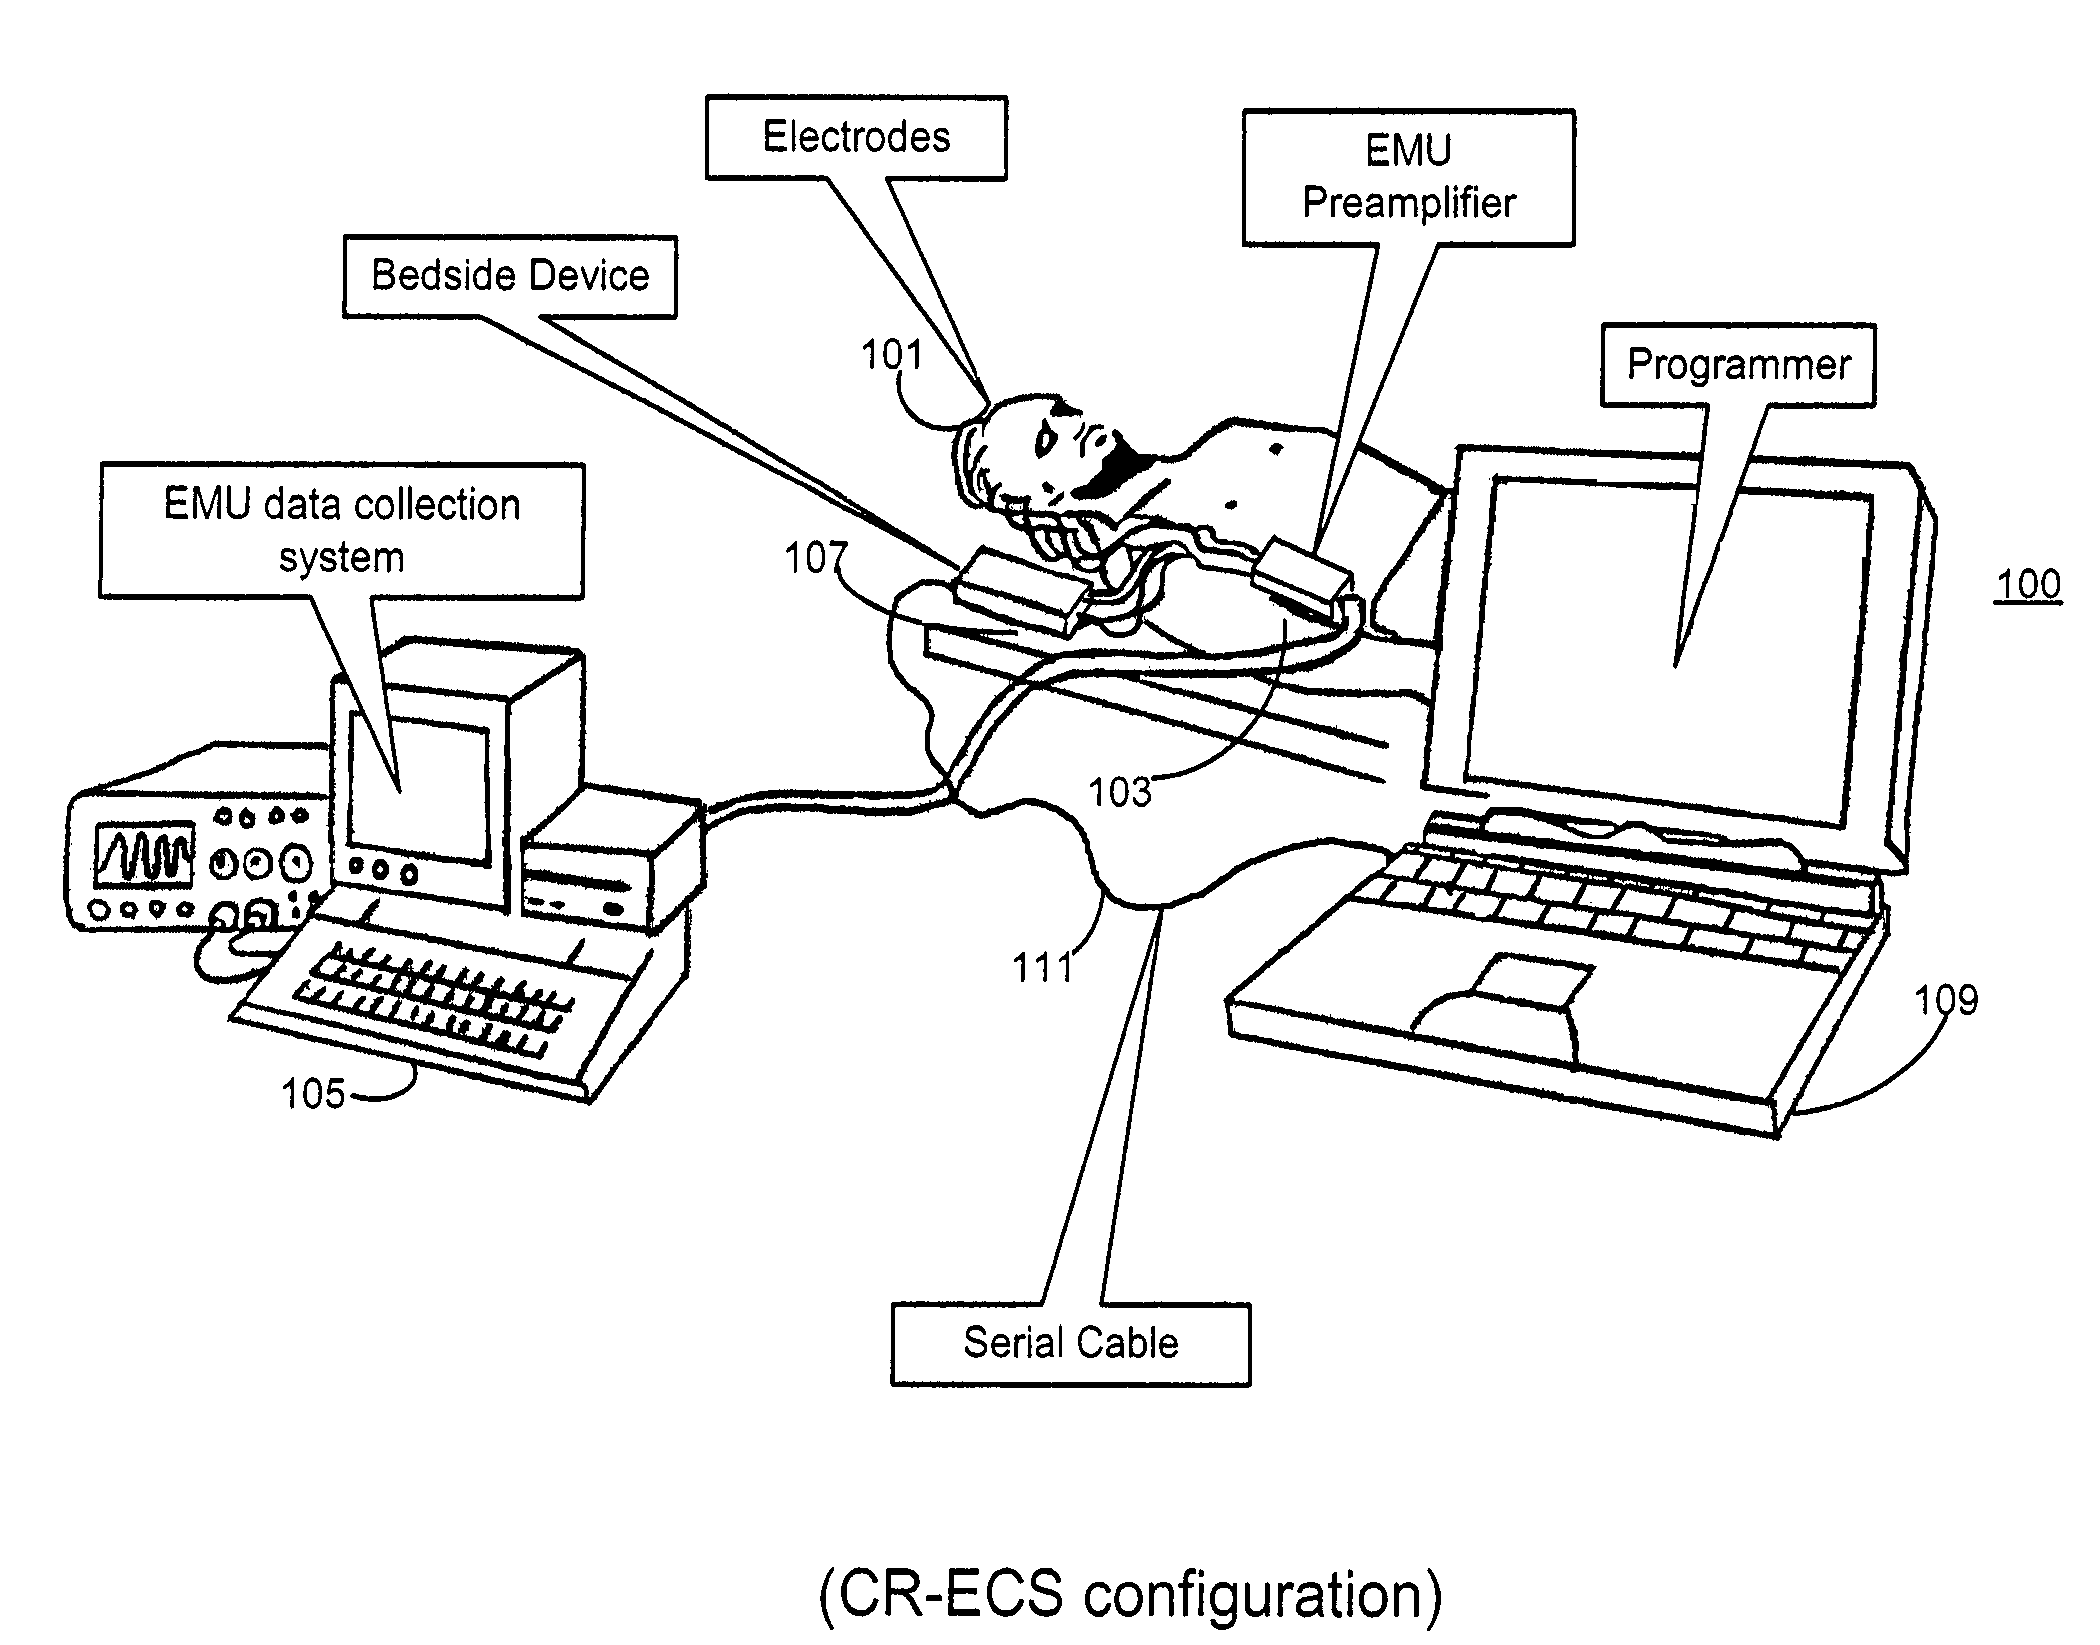 Control of treatment therapy during start-up and during operation of a medical device system